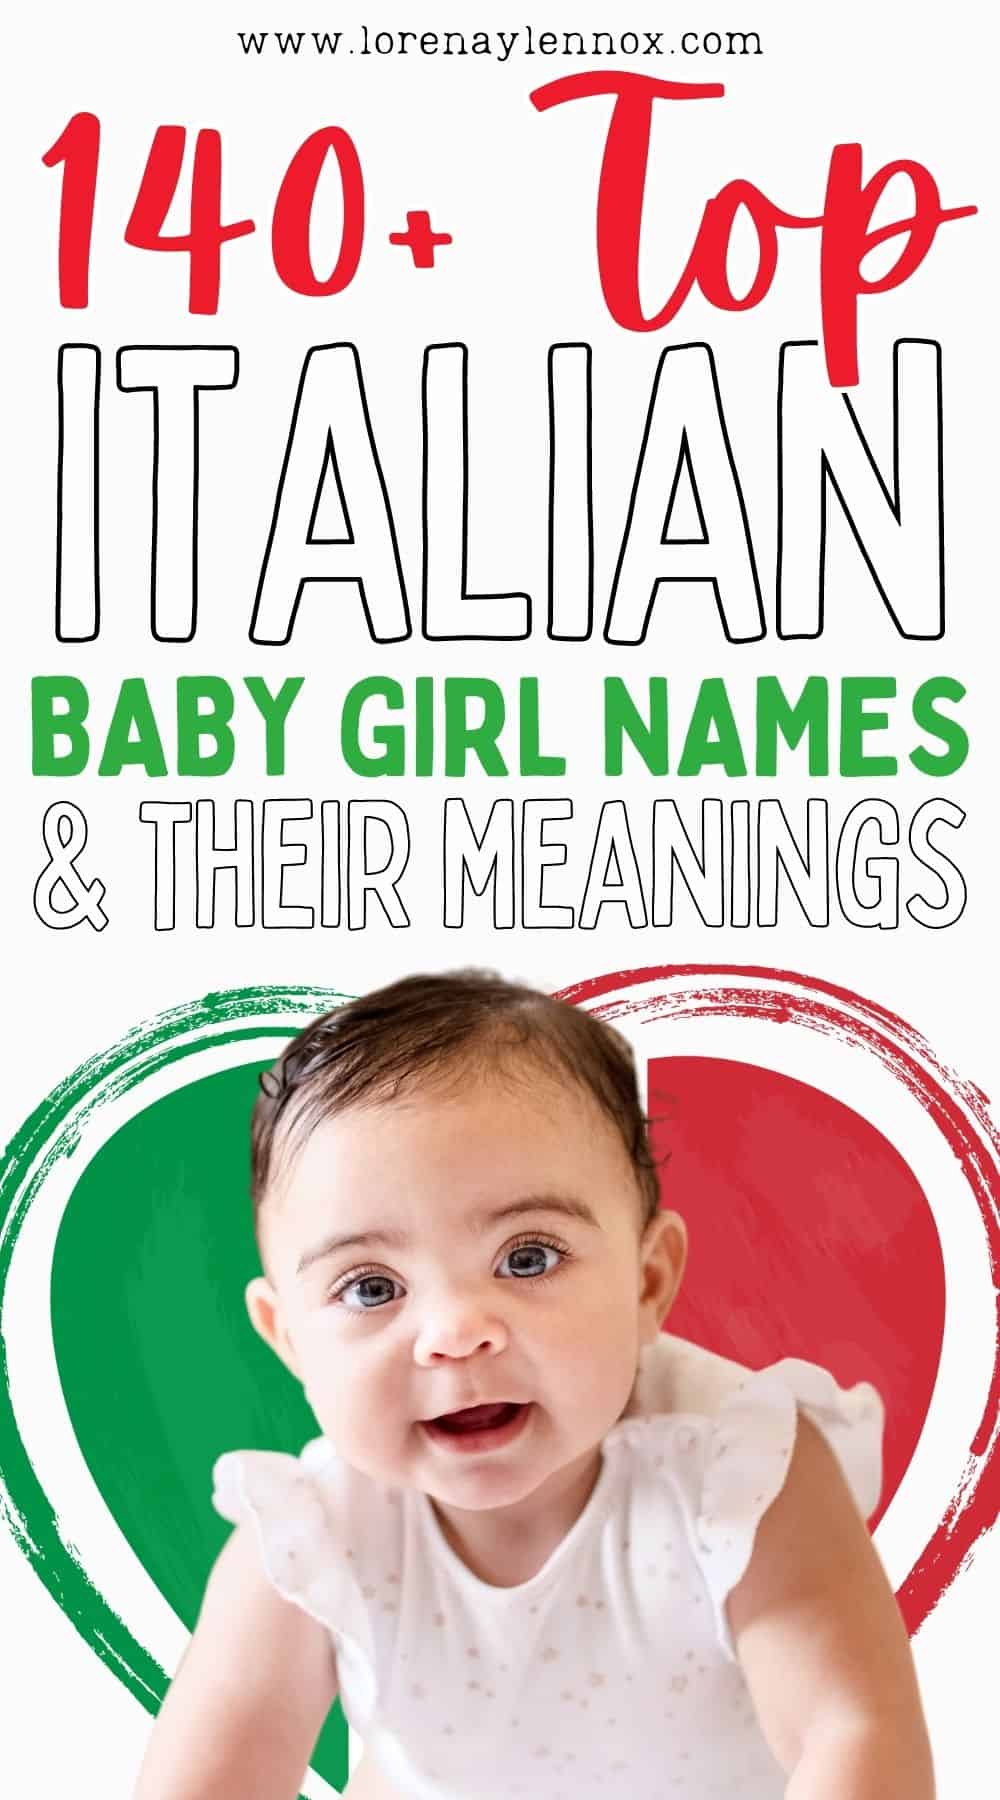 Embark on a journey through the allure of Italian baby girl names with this diverse list of 140+ charming options. From timeless classics to modern delights, explore the cultural richness of Italy and find the perfect name for your little bambina. #ItalianBabyNames #BabyGirlNames #ItalianNames #BambinaNames #BabyNamesInspiration